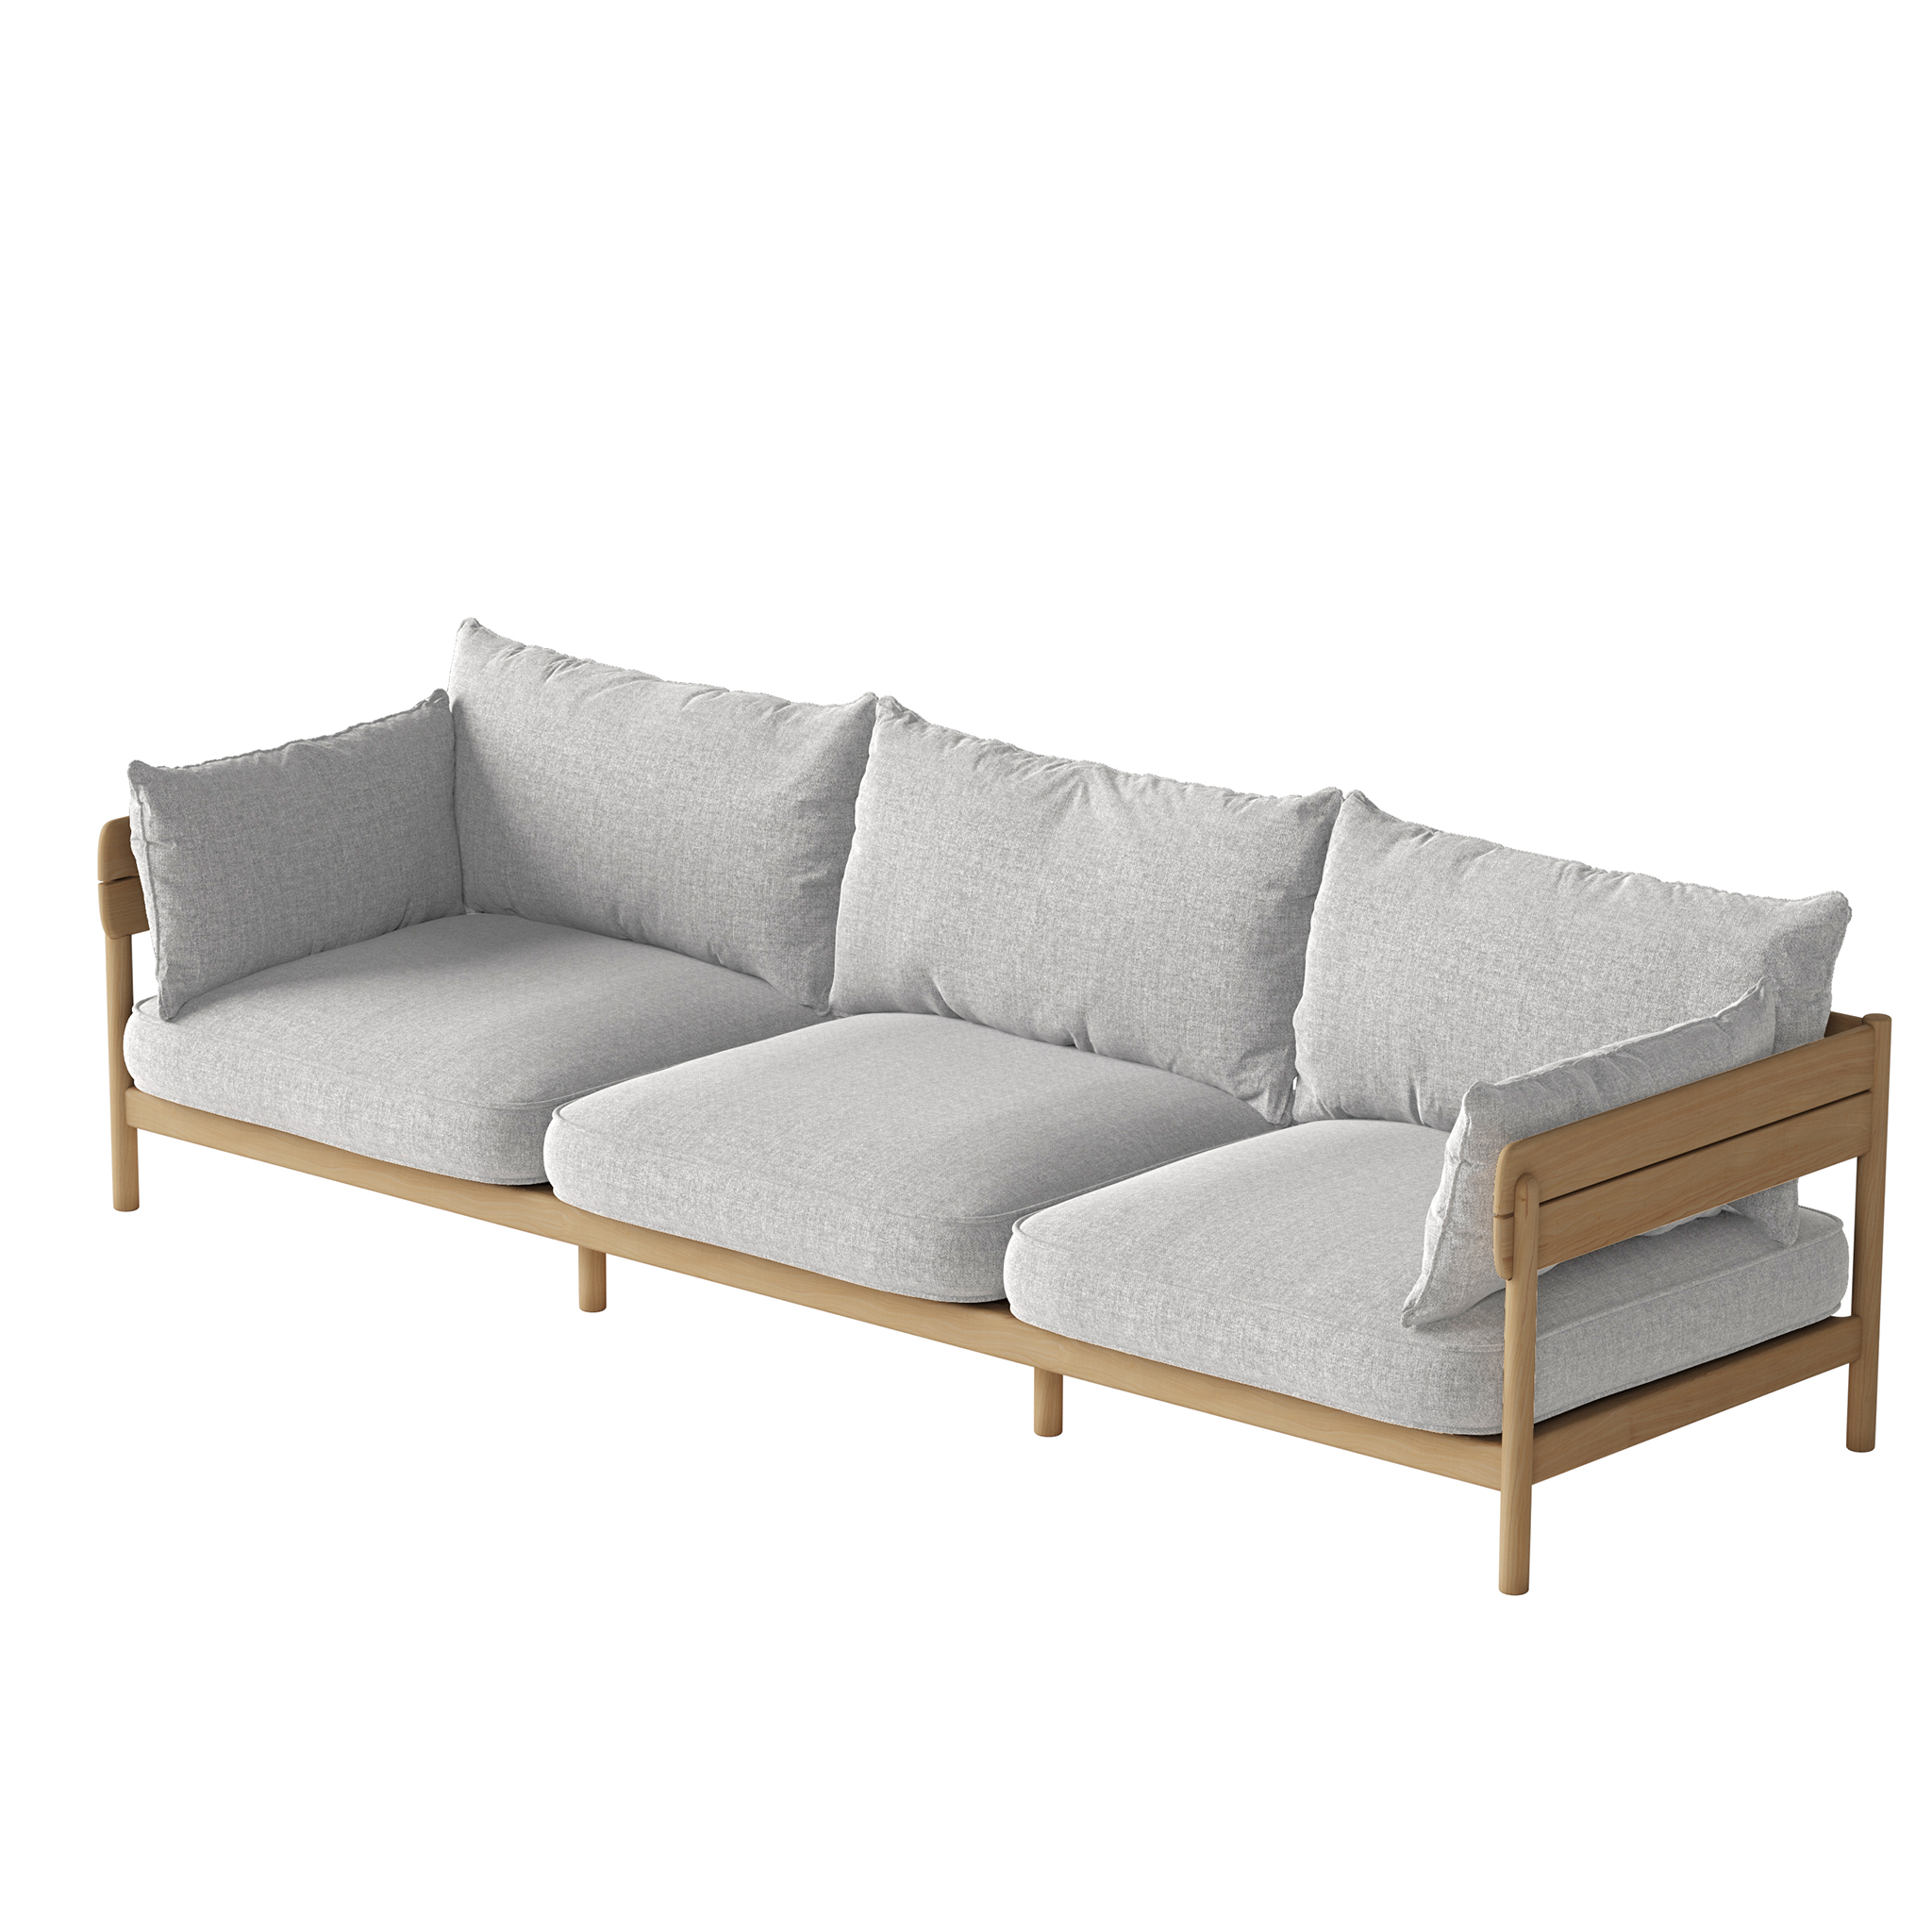 Tanso 3-Seater Sofa by Case